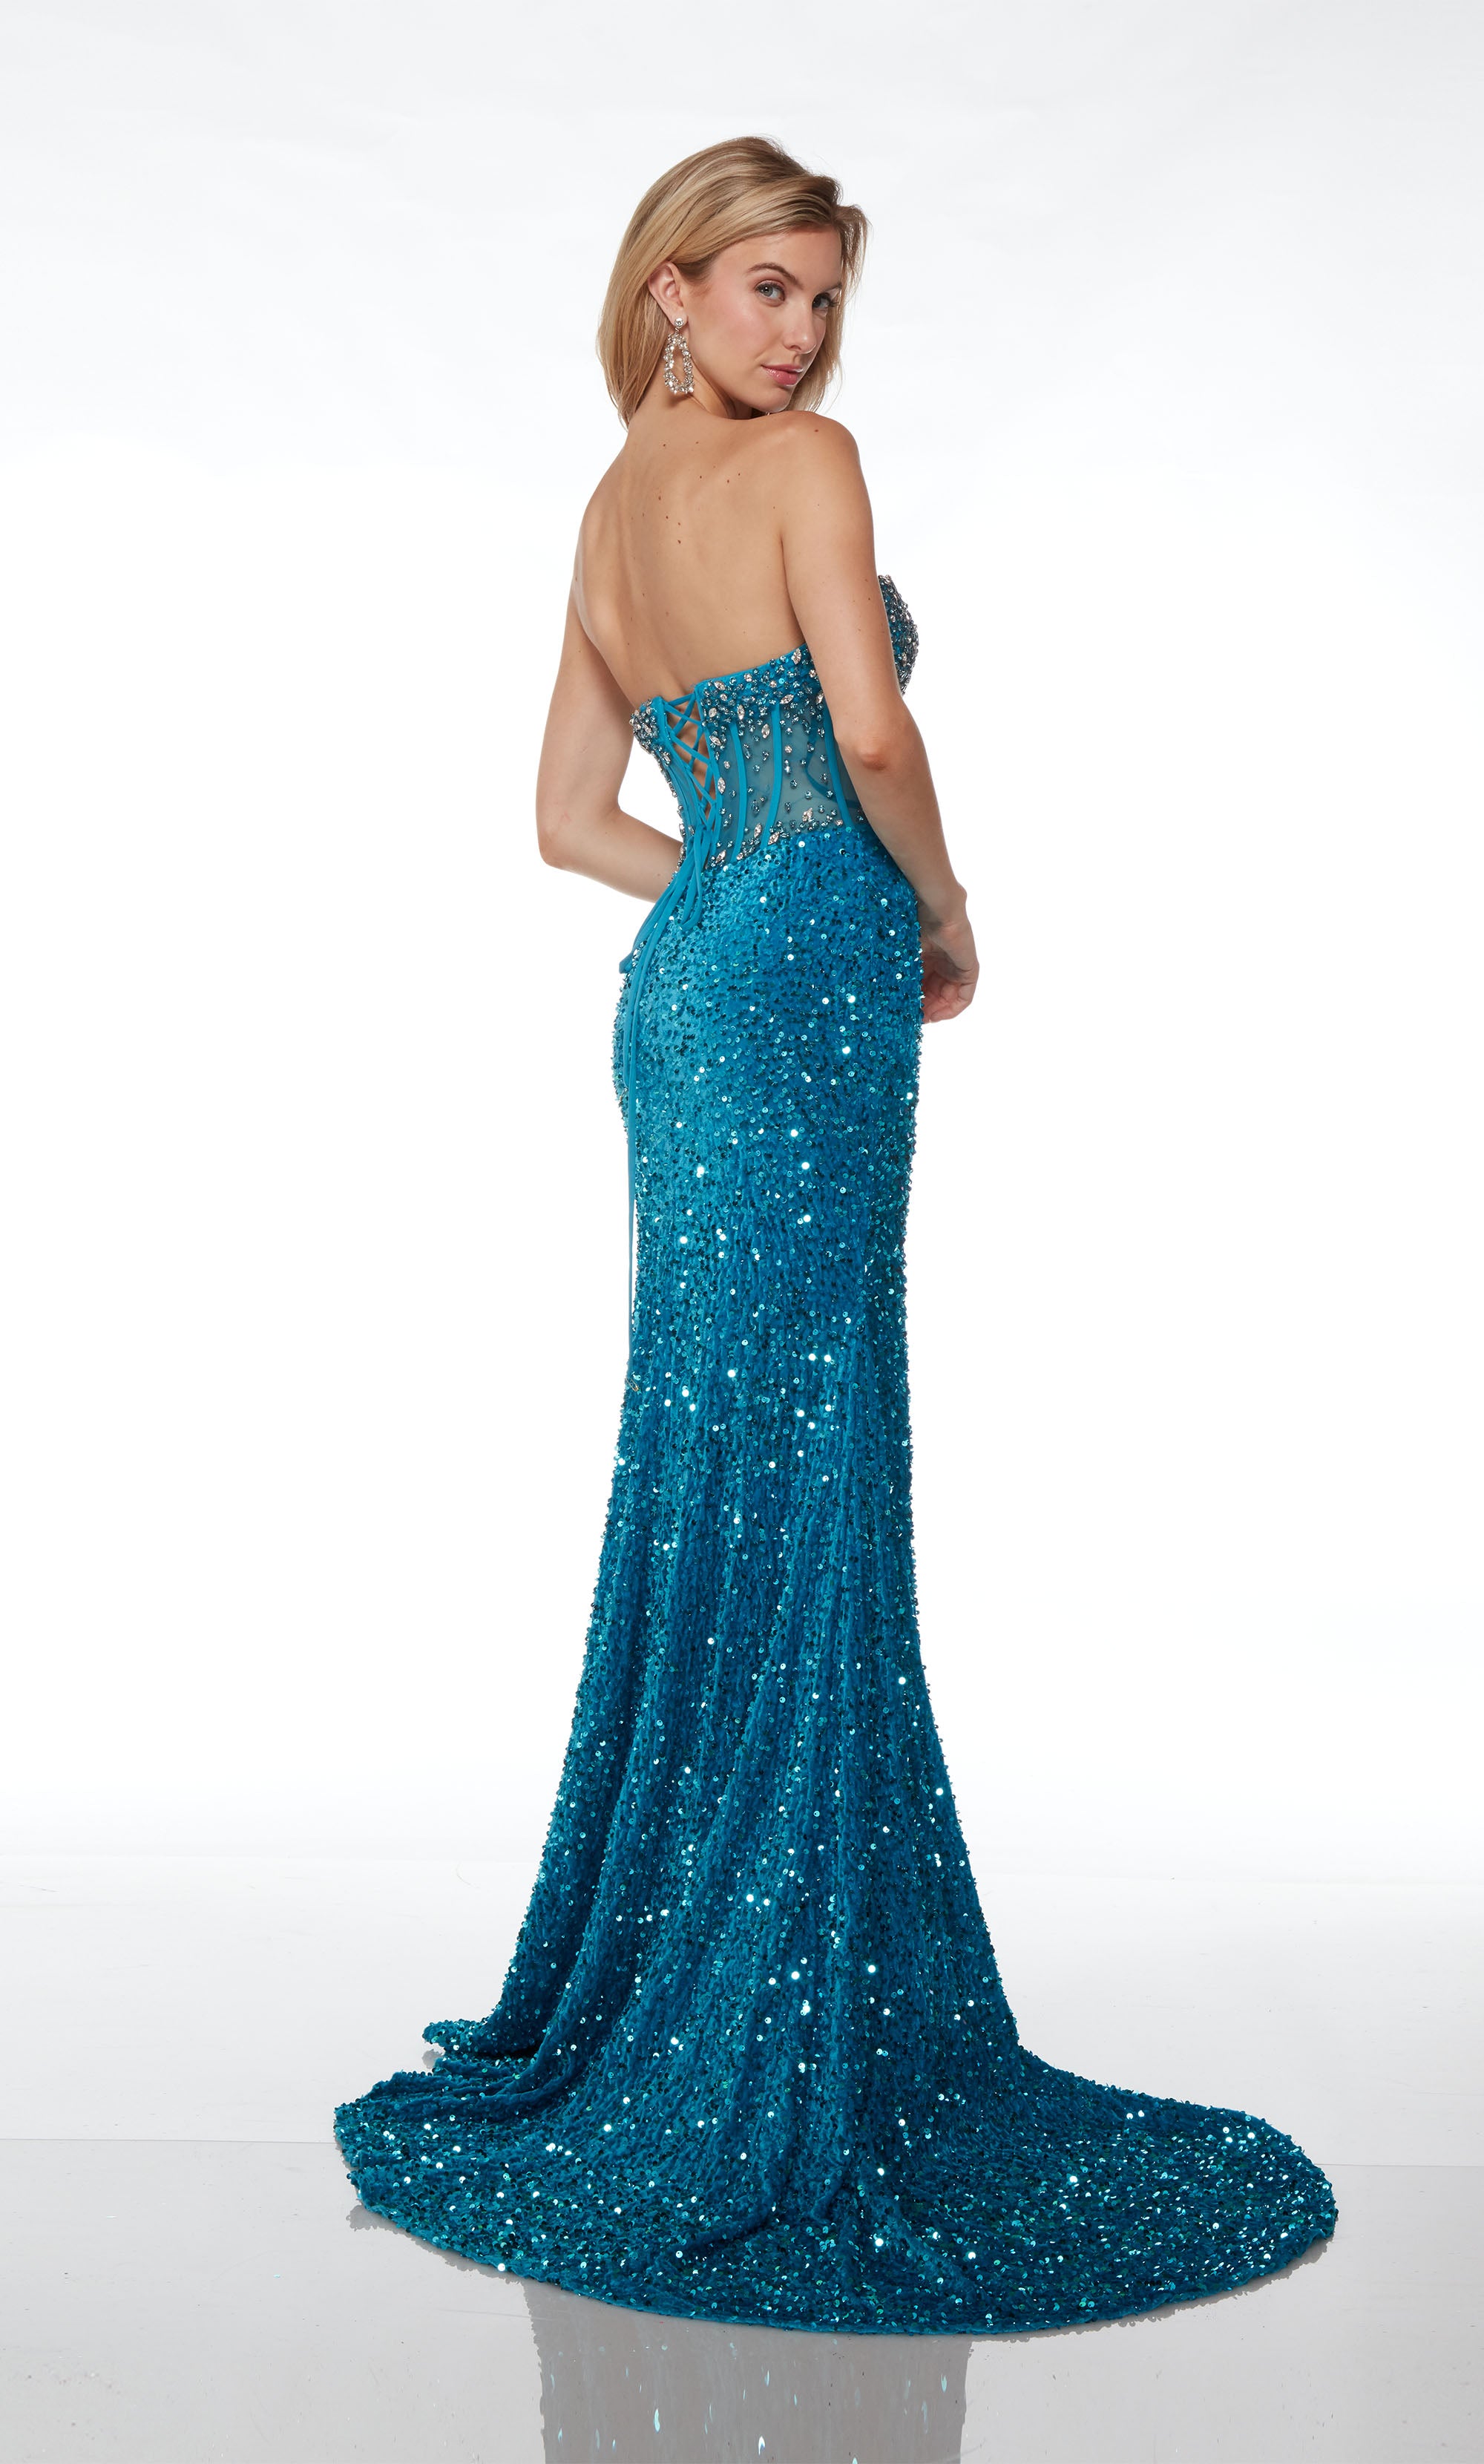 Fully embellished ocean blue prom dress: strapless sheer corset bodice, high slit, lace-up back, and train for an glamorous and stylish look.